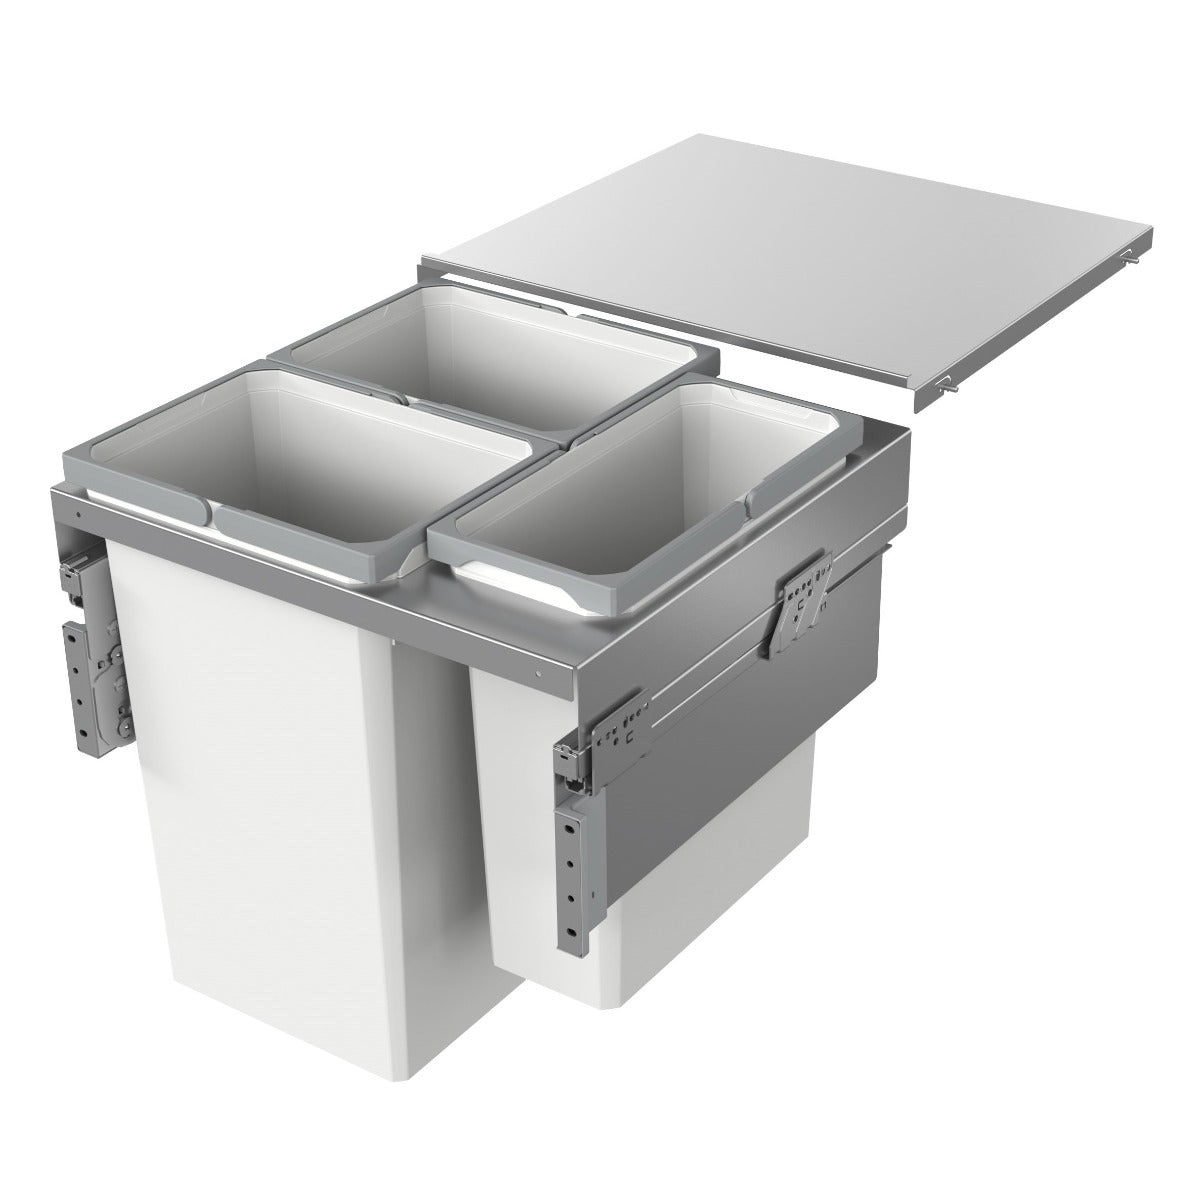 auth-Sagel pull-out integrated kitchen bin in silver grey with three compartments, ideal for separating waste and recycling